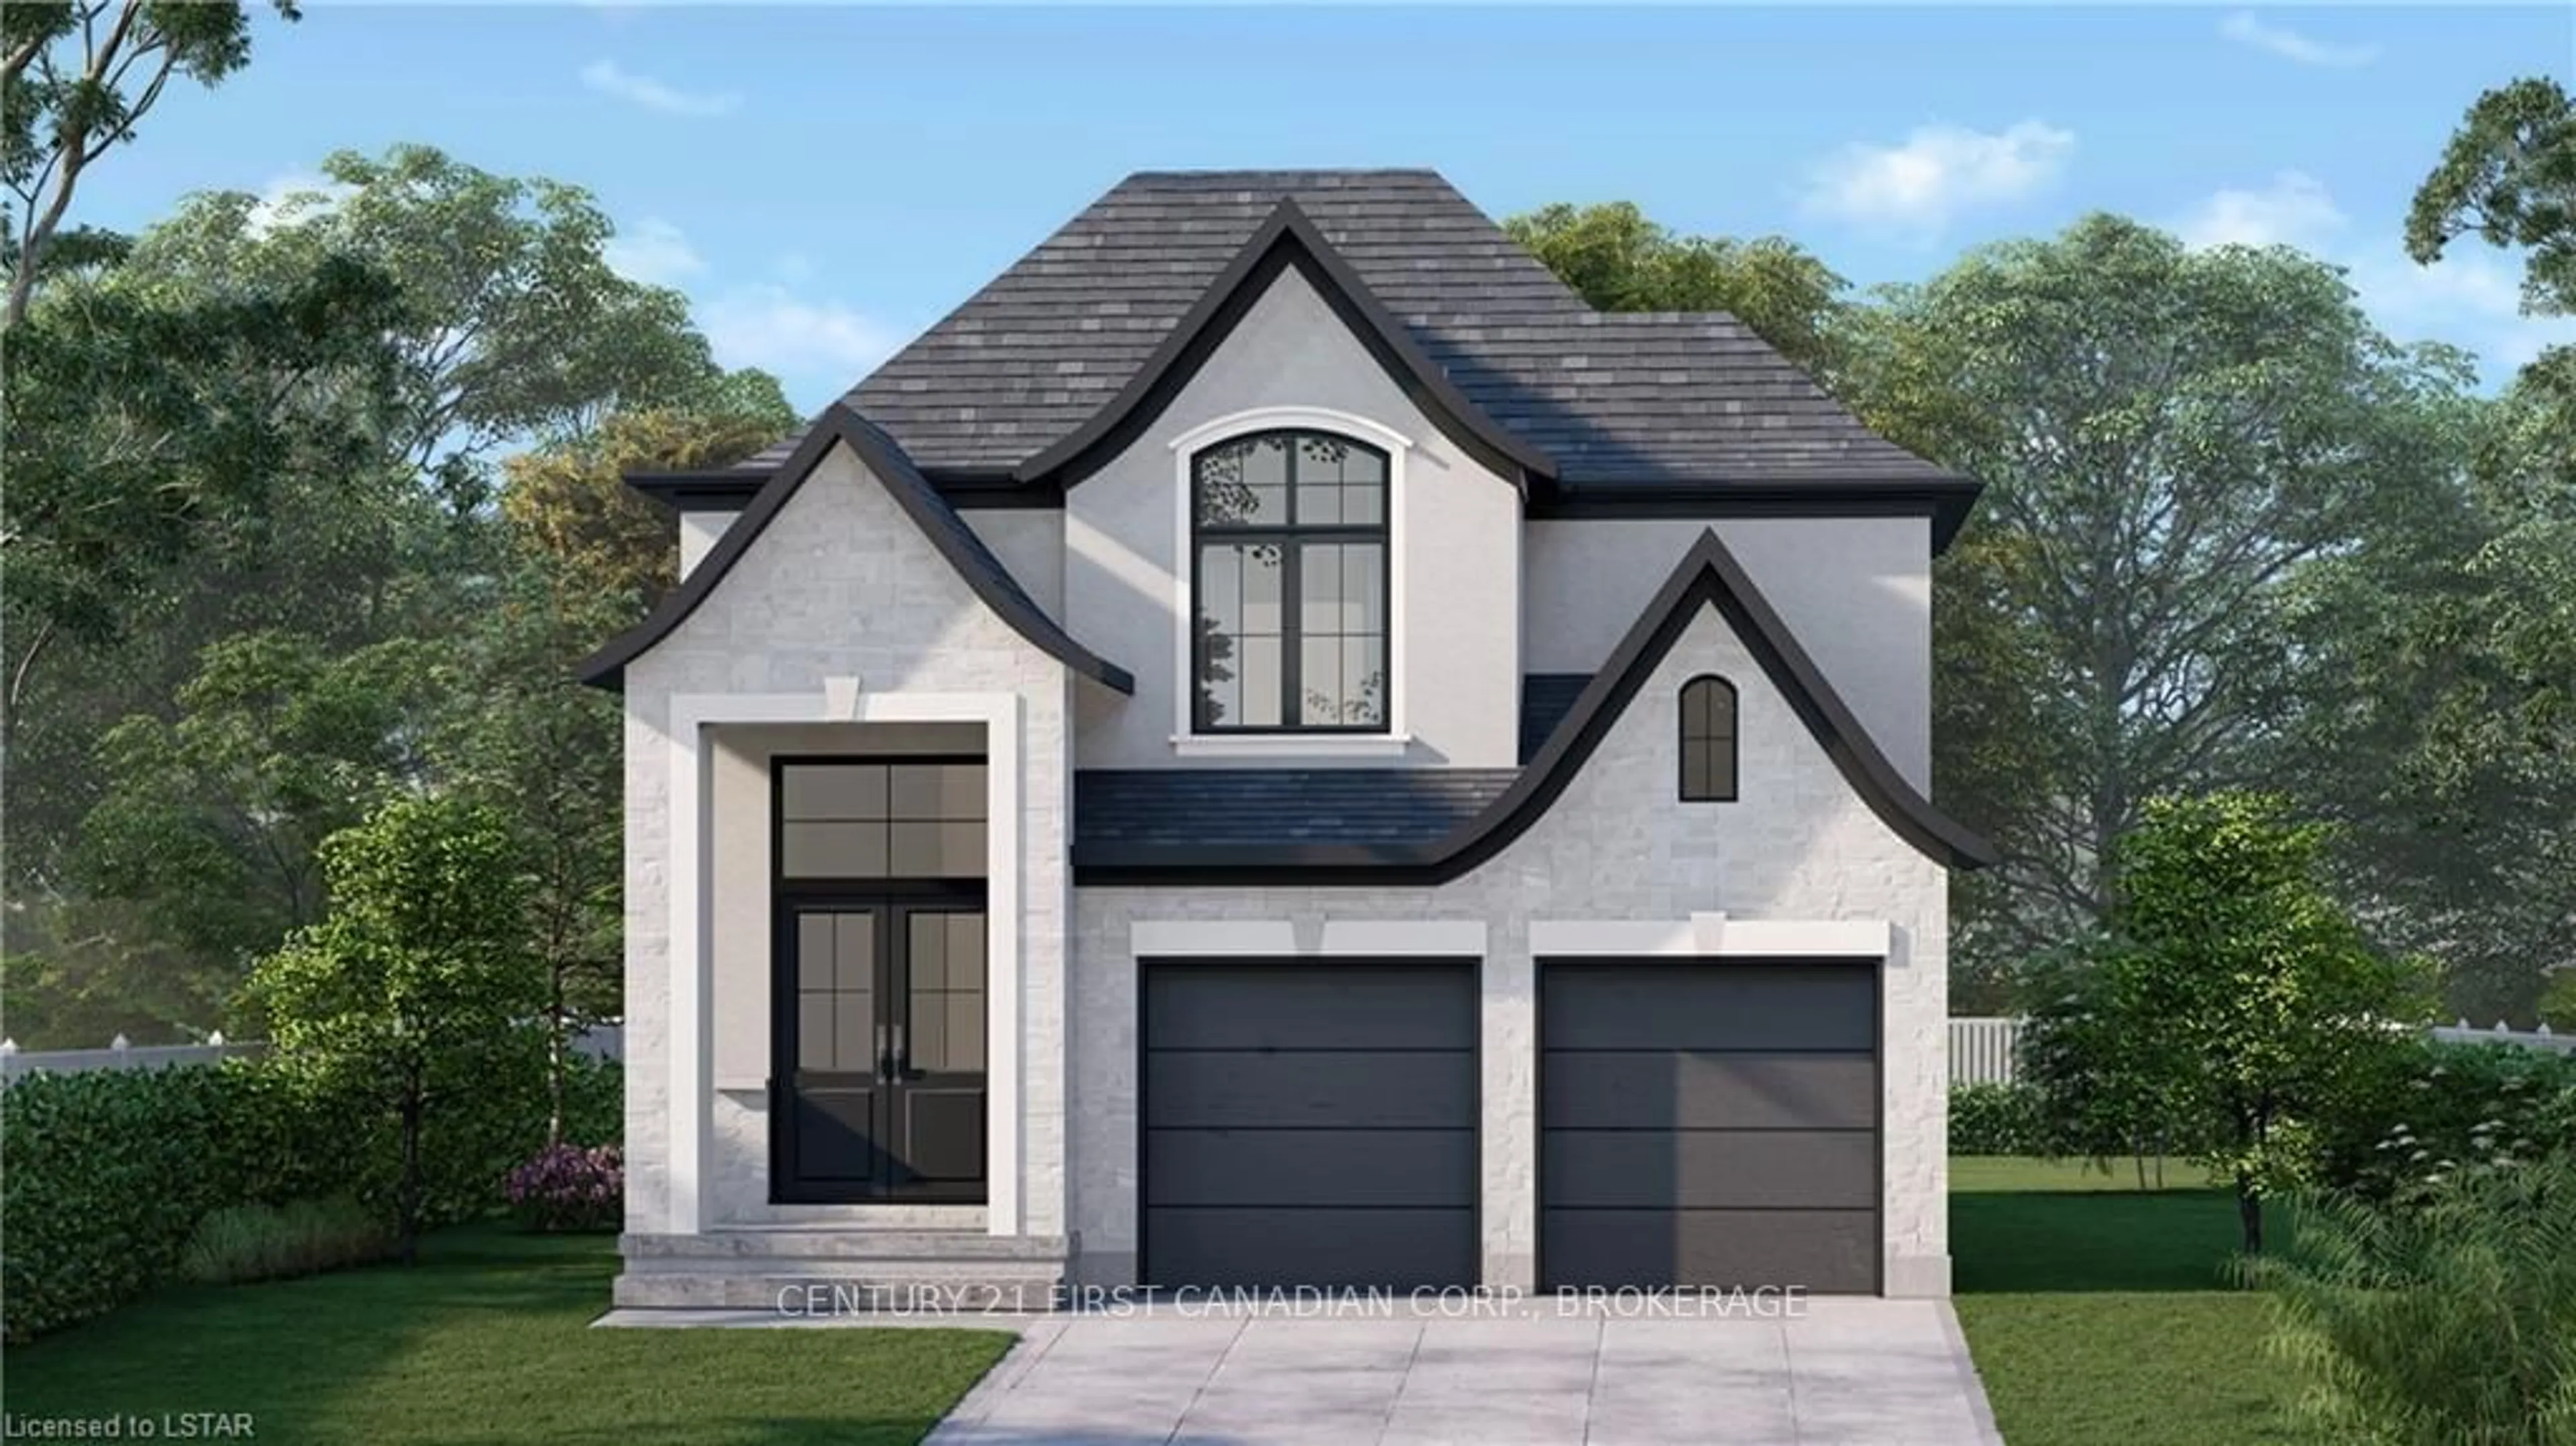 Home with brick exterior material for 2745 Heardcreek Tr, London Ontario N6G 0W1